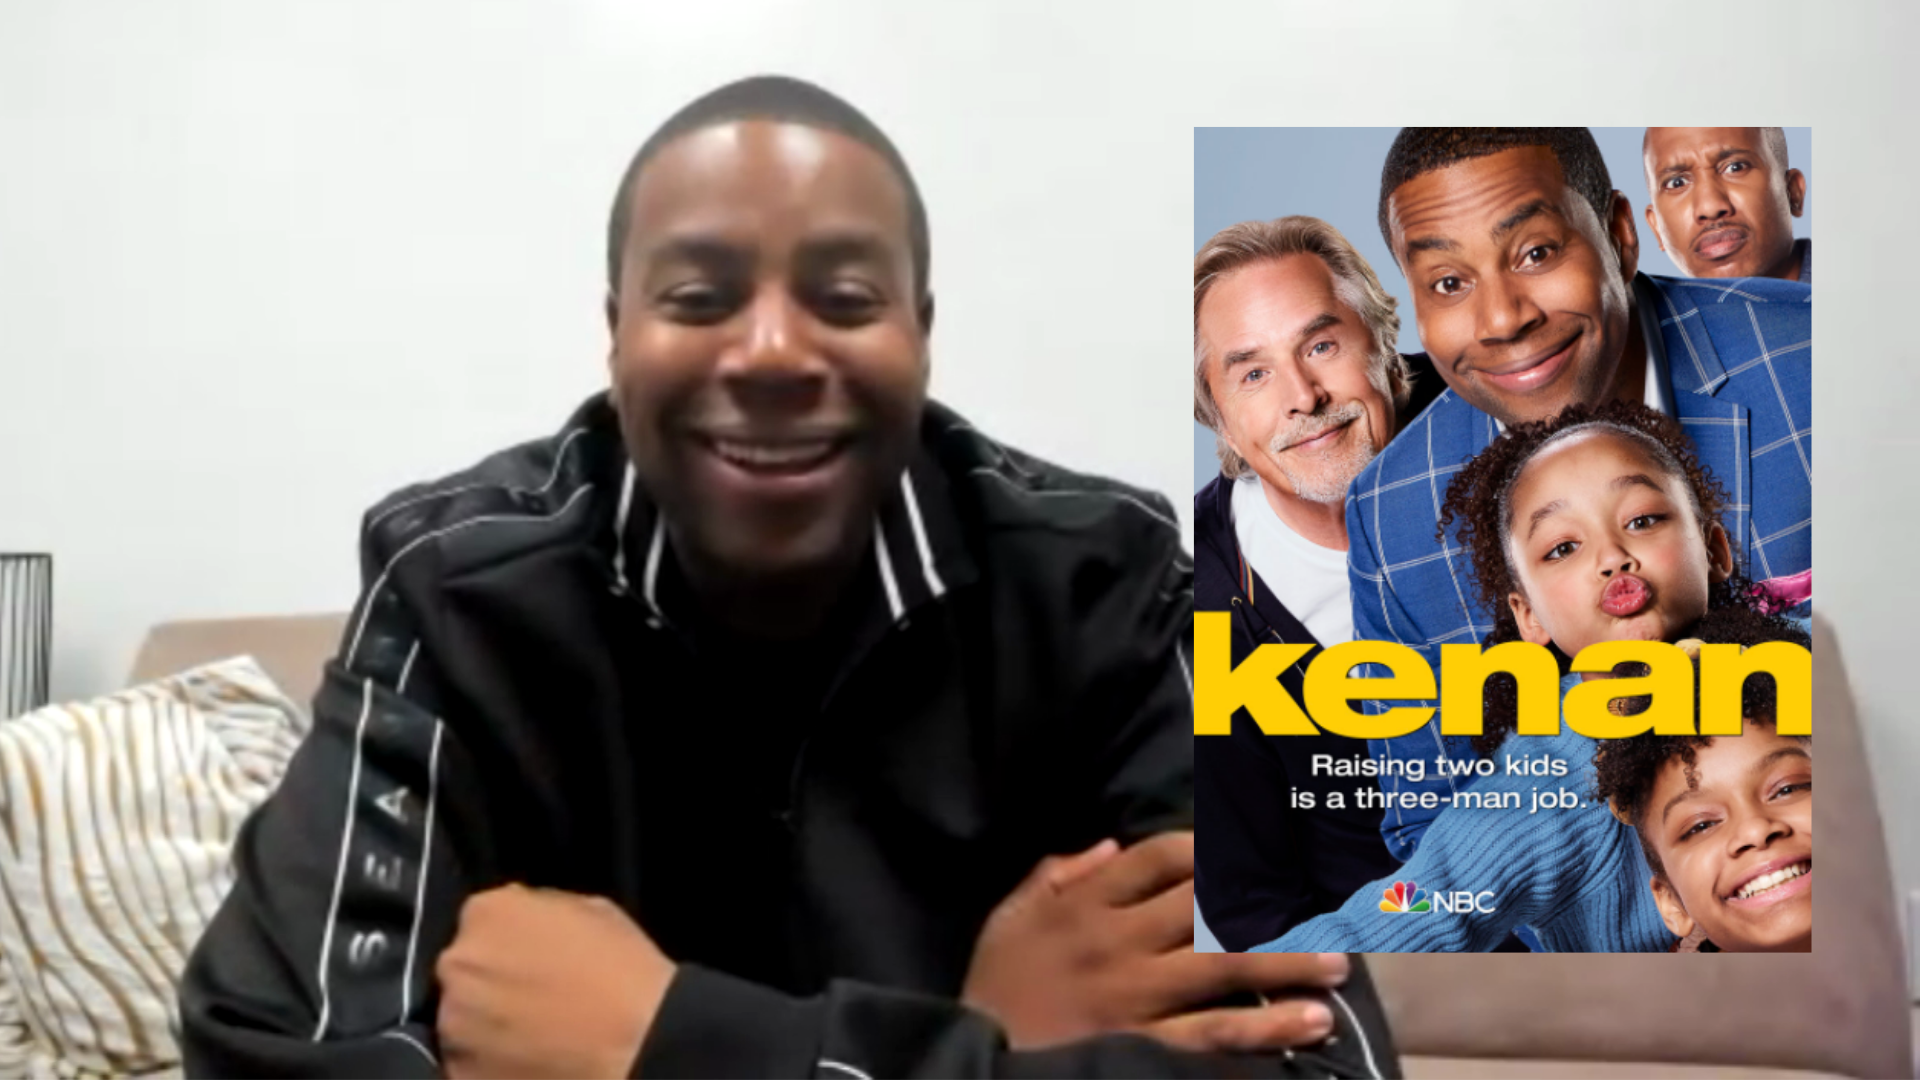 Kenan Thompson stars in "Kenan" about a widowed dad trying to balance parenthood with his job as a morning TV Host in Atlanta